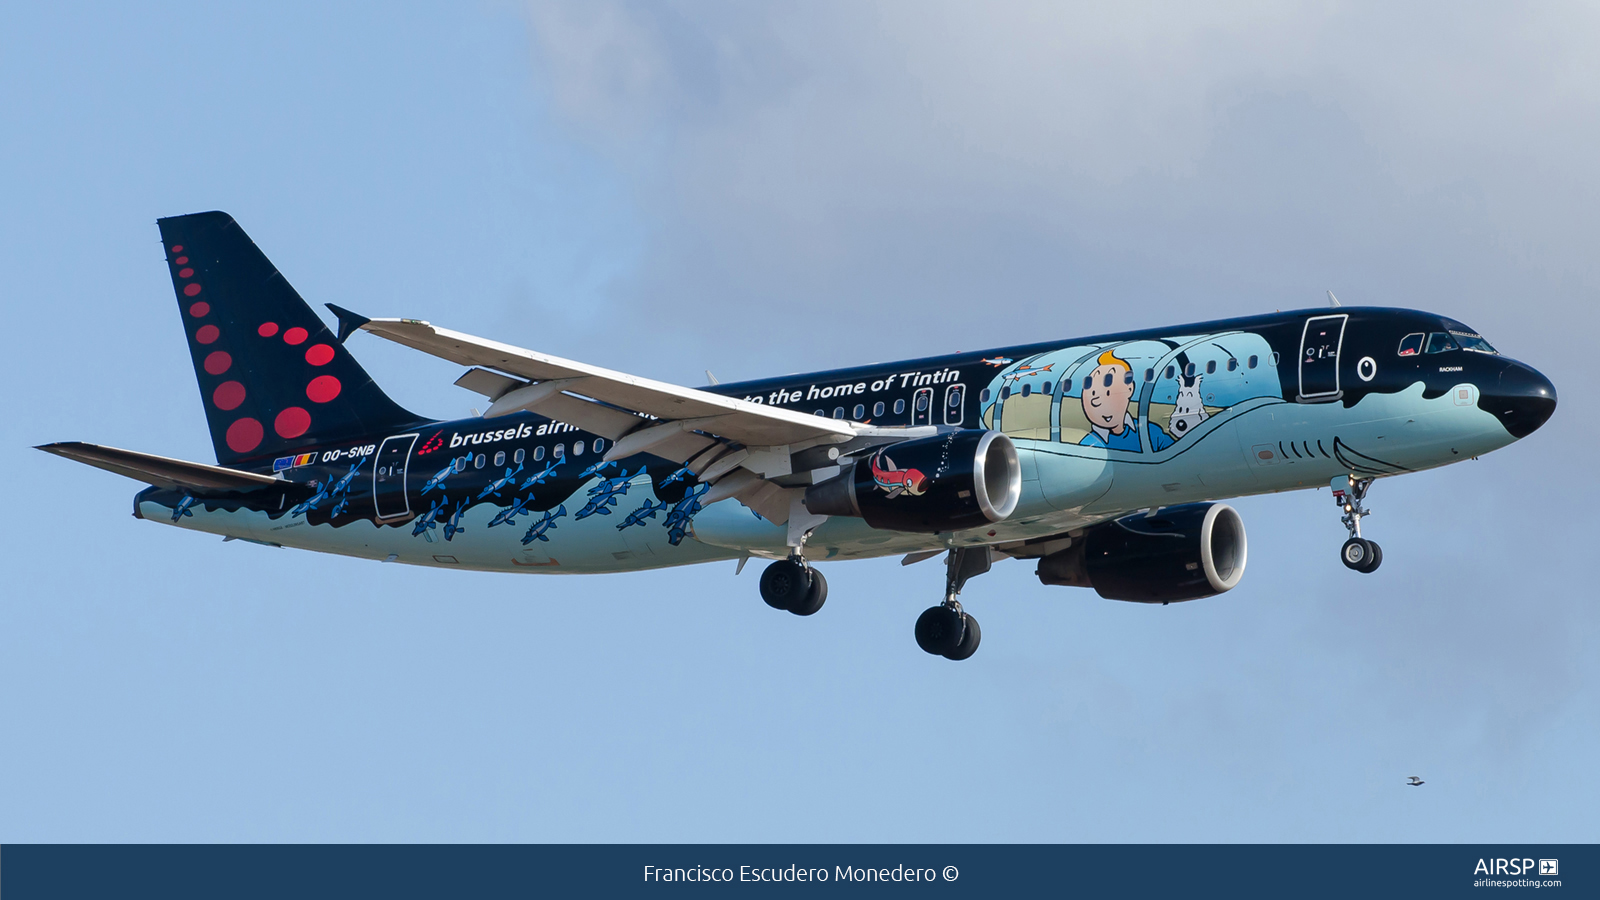 Brussels Airlines  Airbus A320  OO-SNB